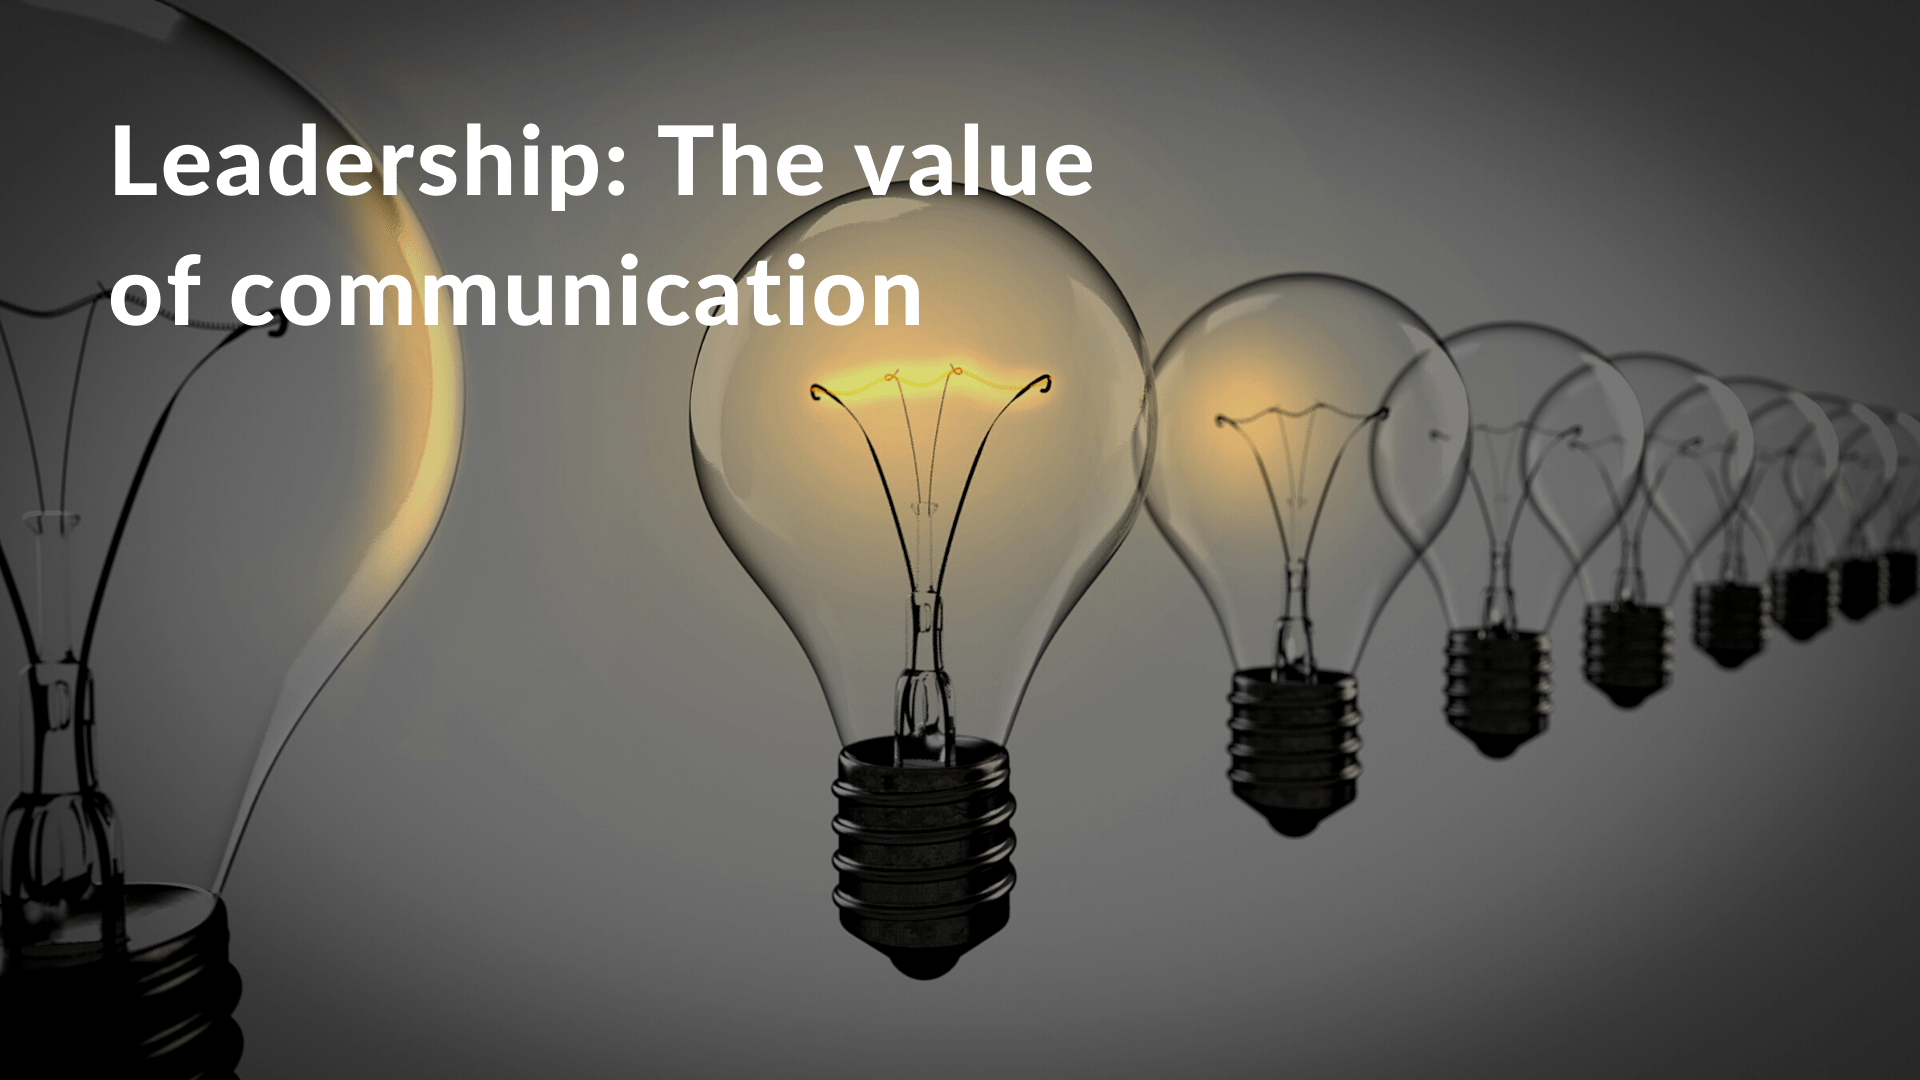 Leadership: The value of communication